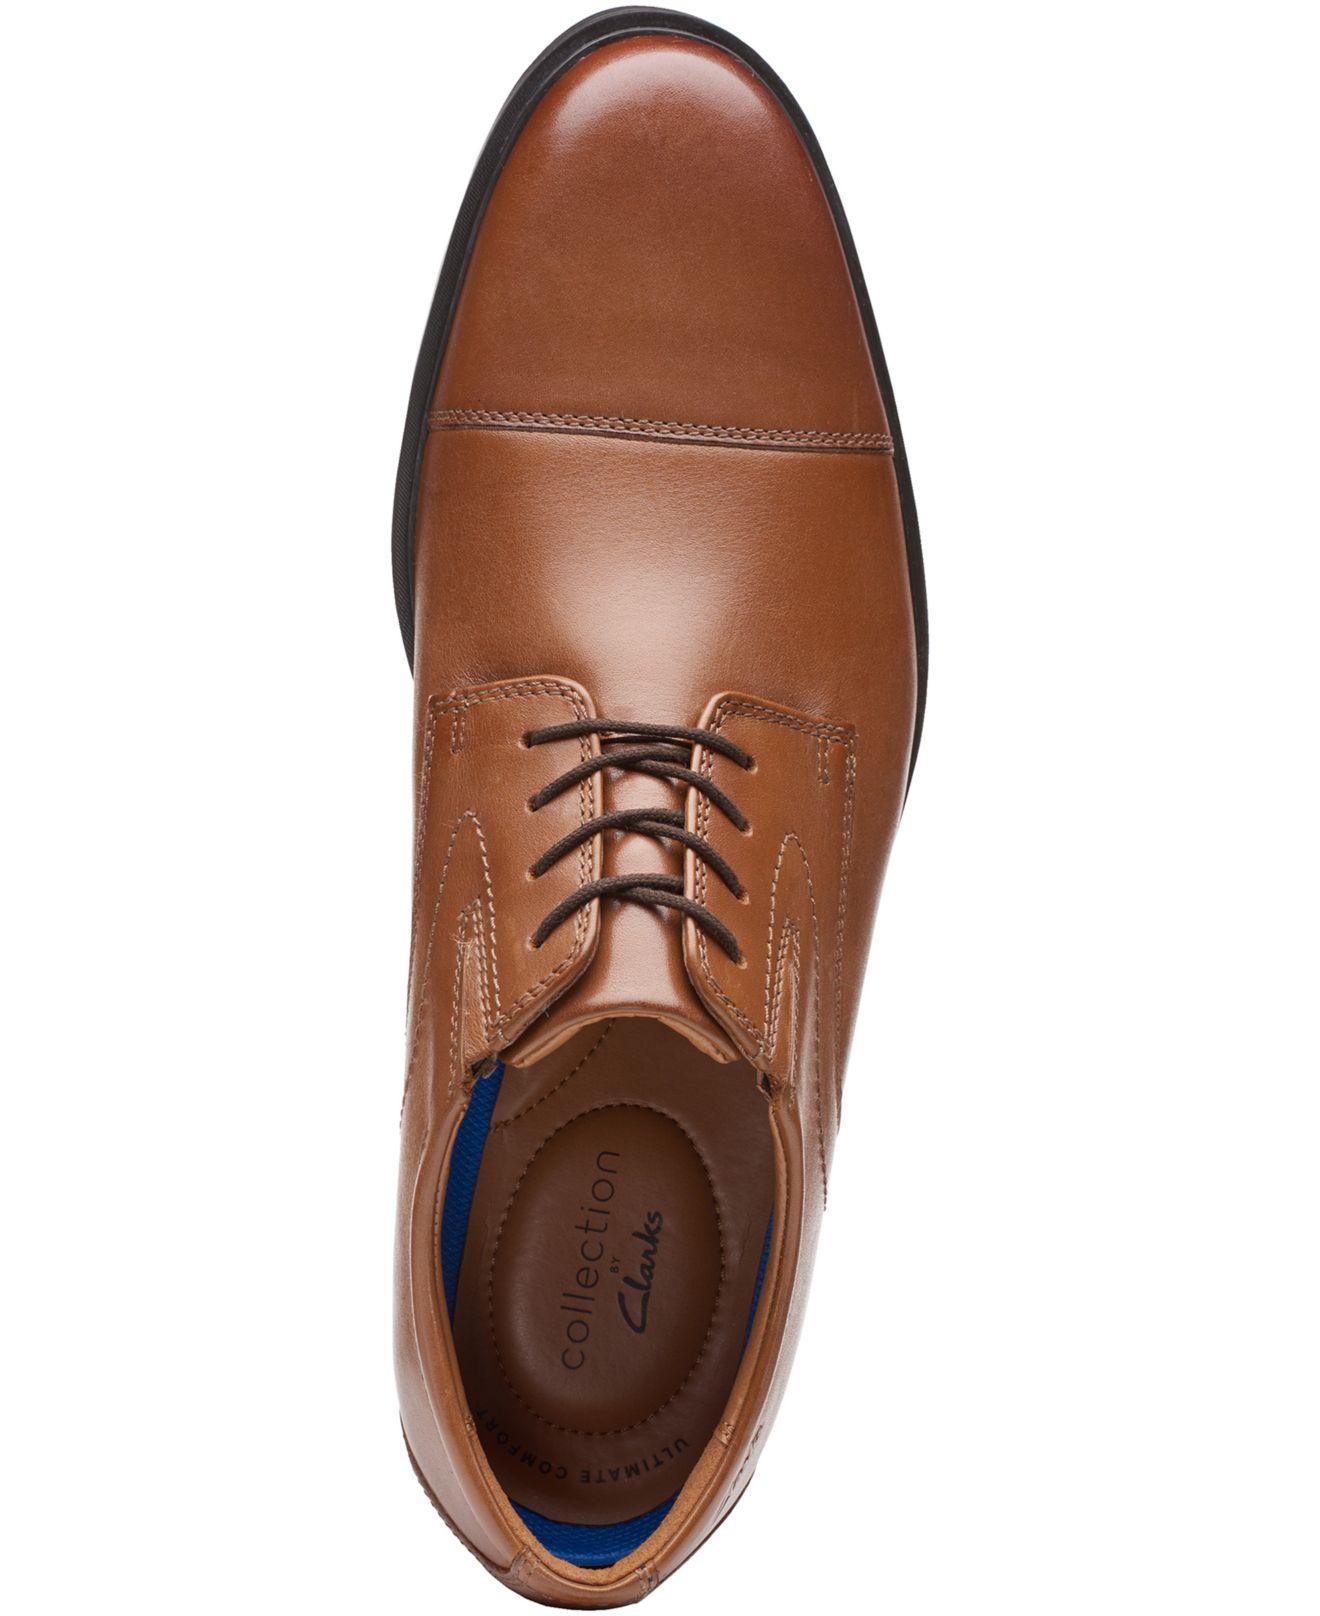 Clarks Leather Whiddon Cap-toe Oxfords in Dark Tan l (Brown) for 